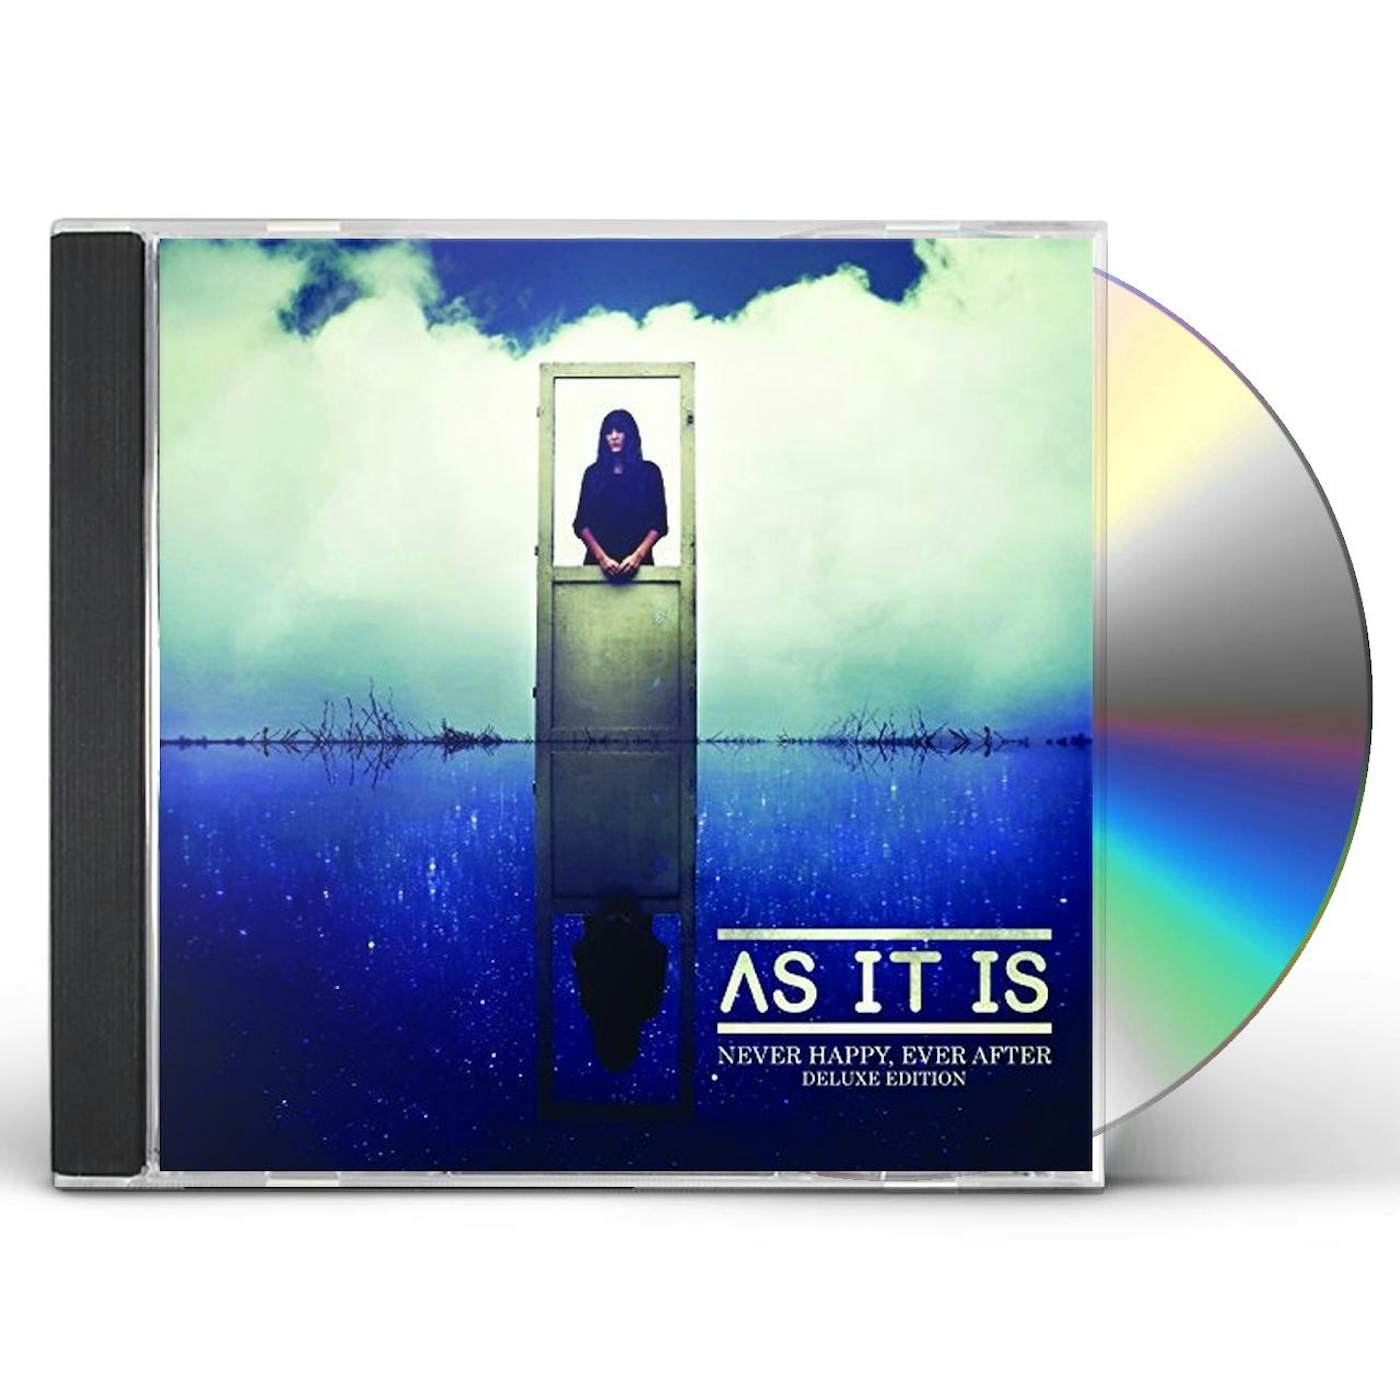 AS IT IS NEVER HAPPY EVER AFTER: DELUXE EDITION CD